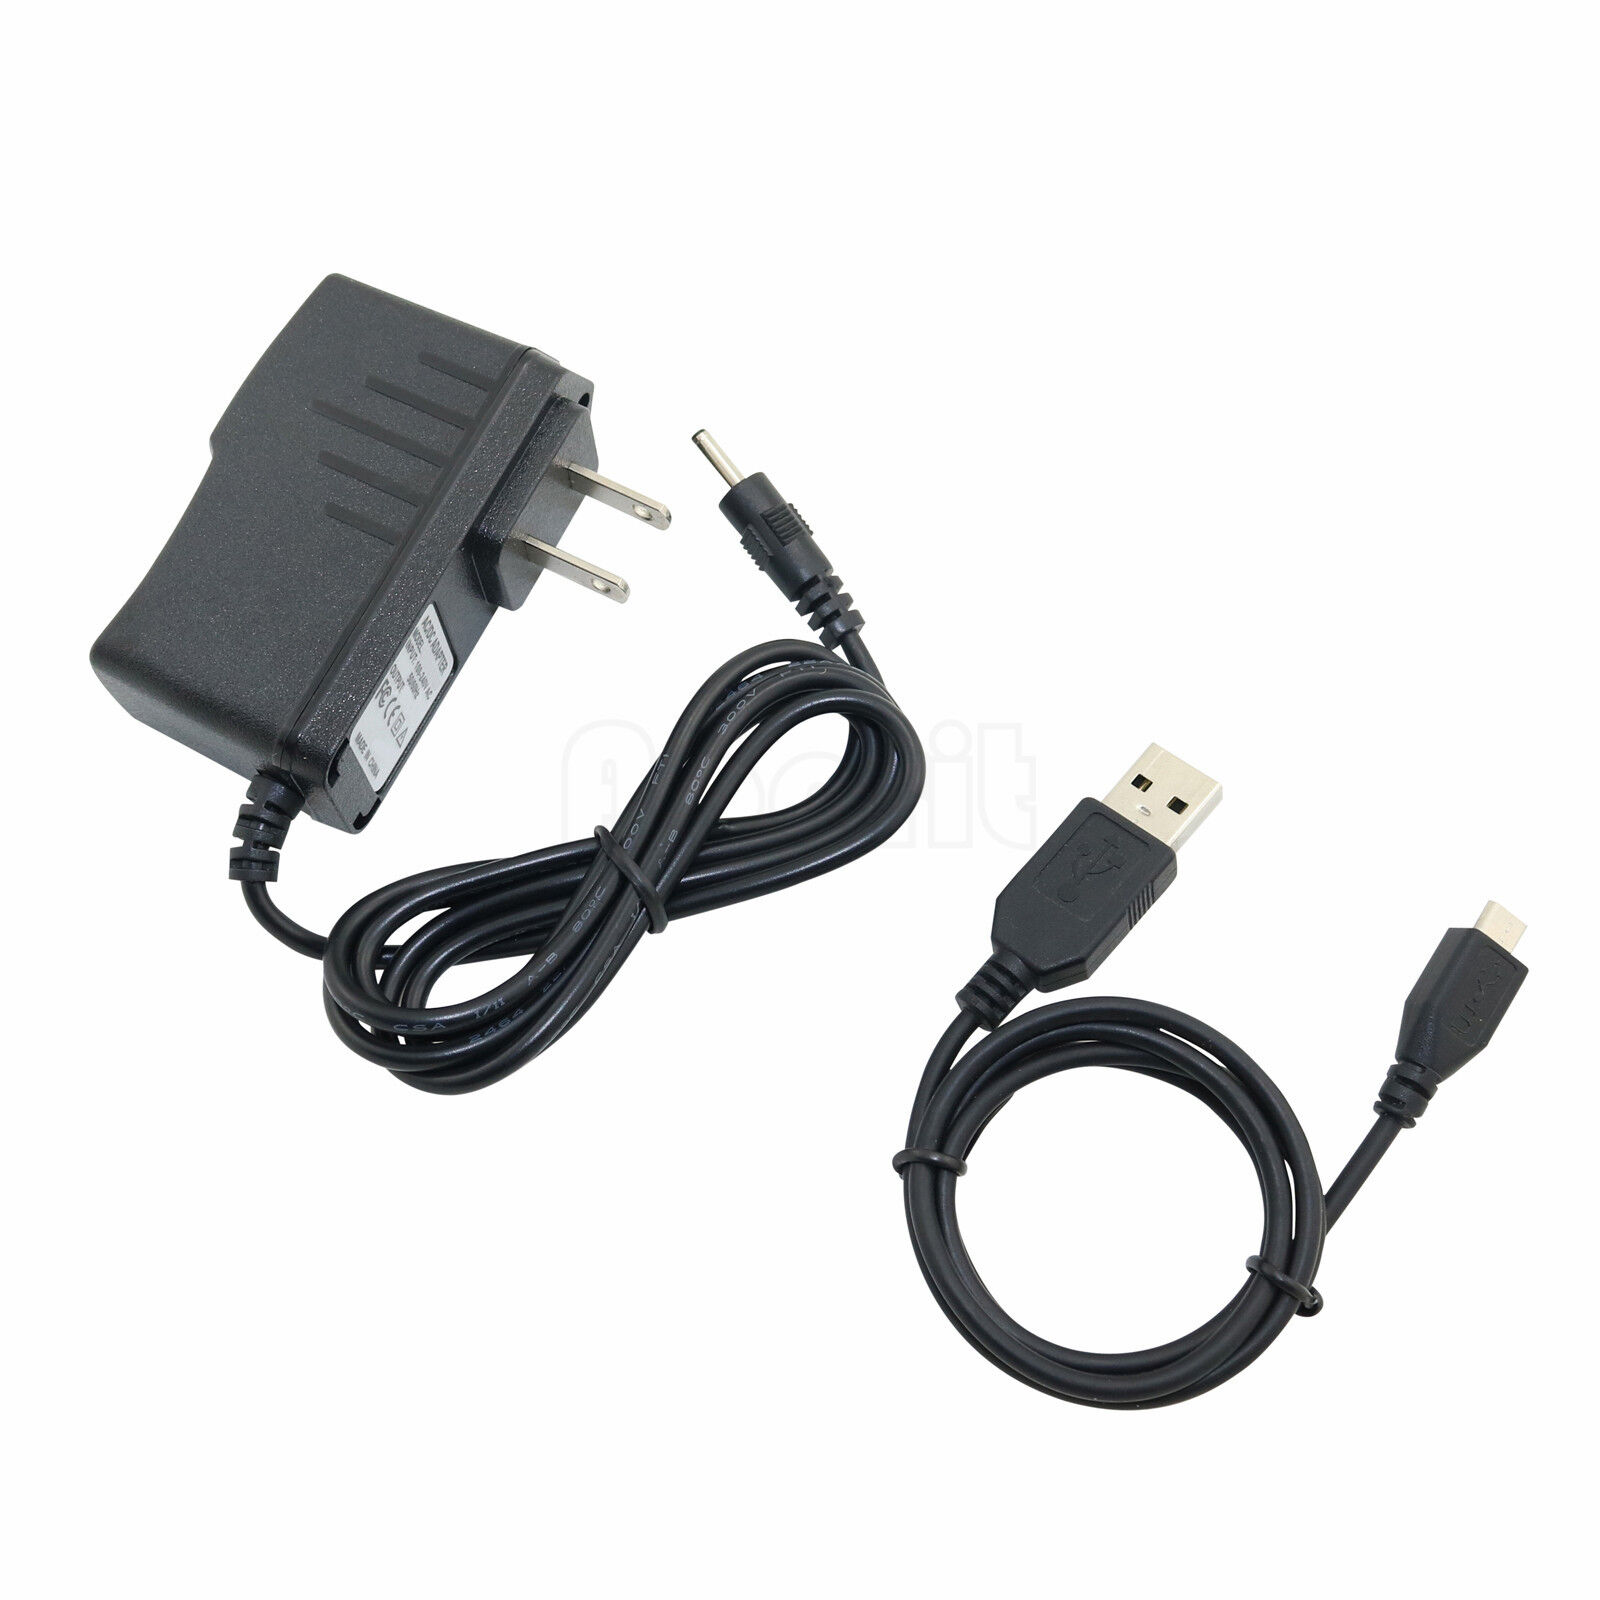 AC Adapter Power Charger + USB Cord for Nextbook Premium 10se NEXT10P12 Tablet AC Adapter Power Charger + USB Cord for